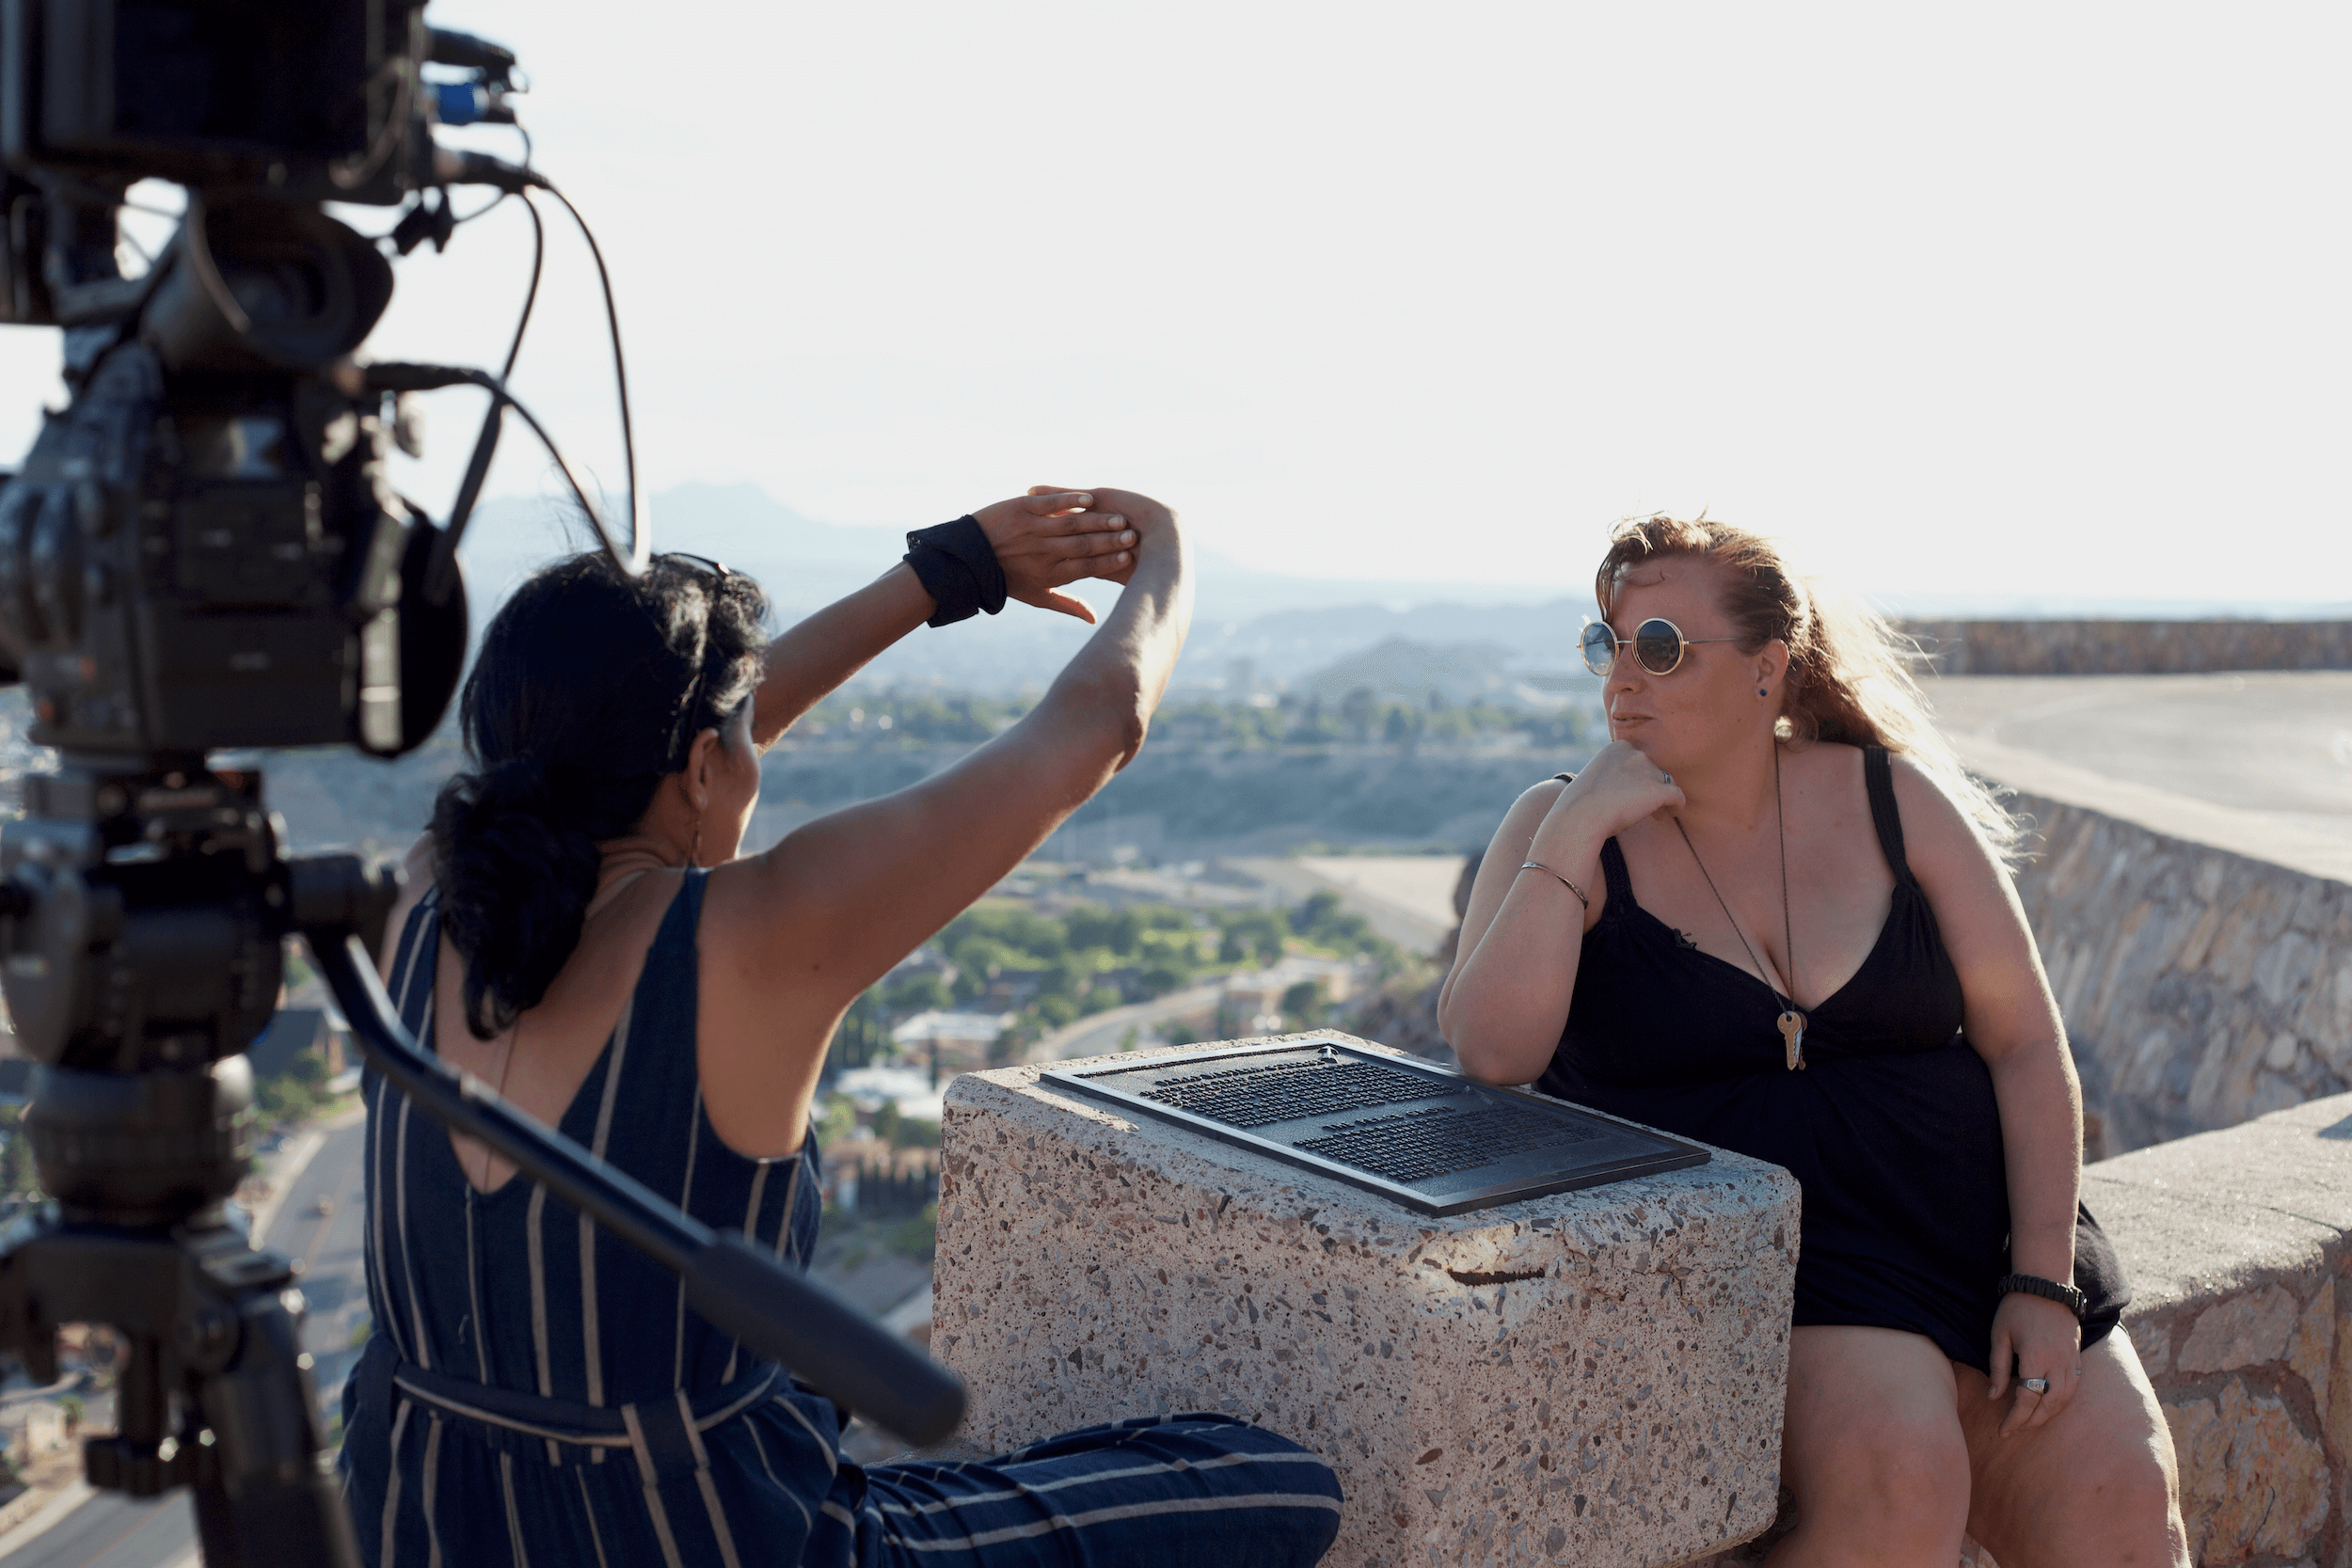 Chithra Jeyaram, a south Asian filmmaker, and Brandy Stein, a white woman, are sitting facing each other at a scenic outlook at magic hour. Chithra is facing away from the camera with her arms outstretched to block the sun while in conversation with Brandy, who is facing the camera. Brandy has sunglasses and her right elbow is resting on a plaque with the hand under her chin. In the foreground to the left, is a camera on a tripod, both out of focus.